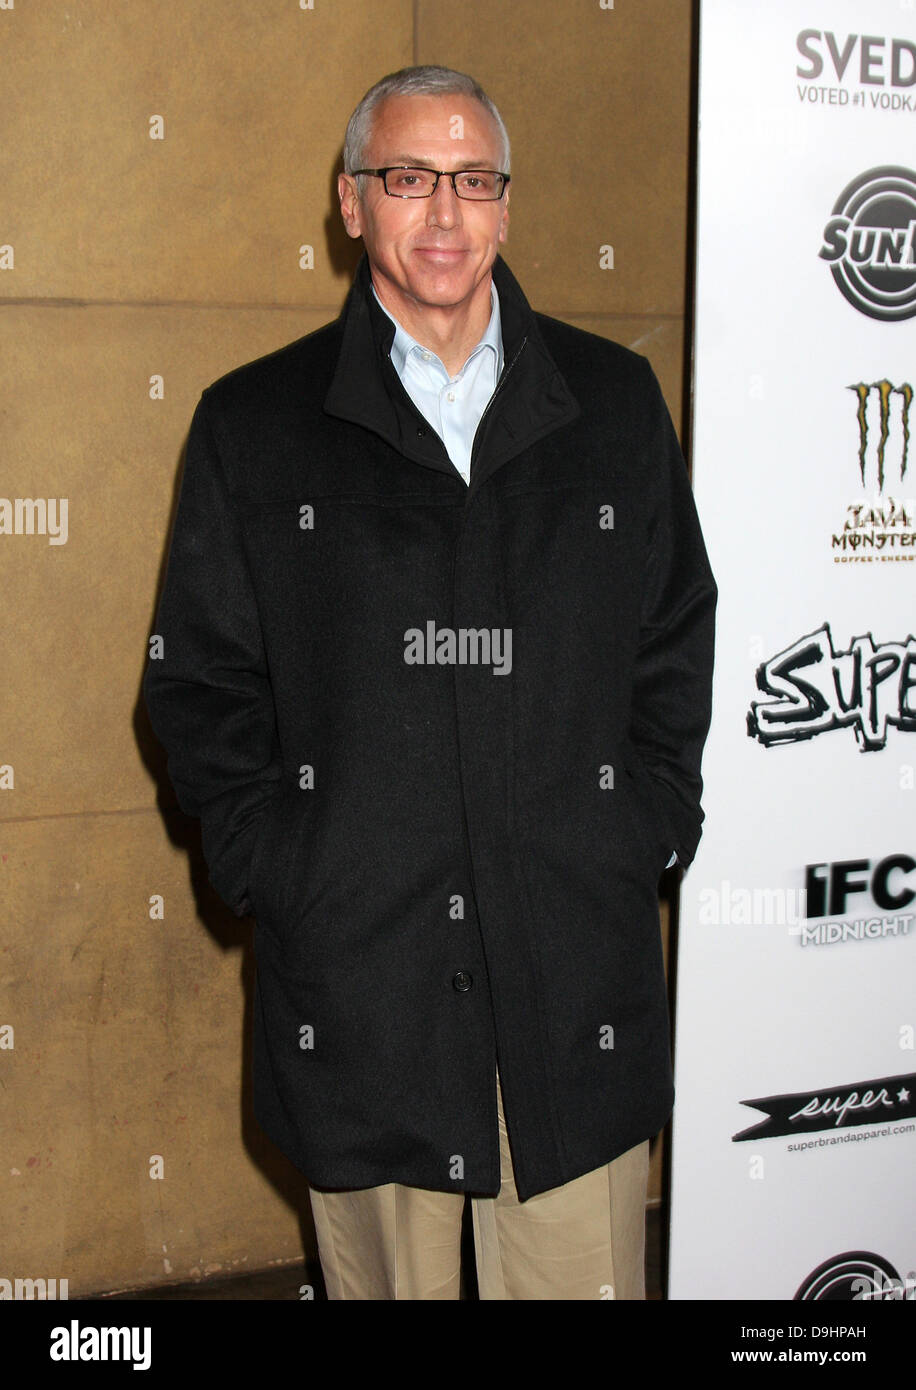 Drew Pinsky Los Angeles Premiere of 'Super' held at The Egyptian Theatre Hollywood, California - 21.03.11 Stock Photo